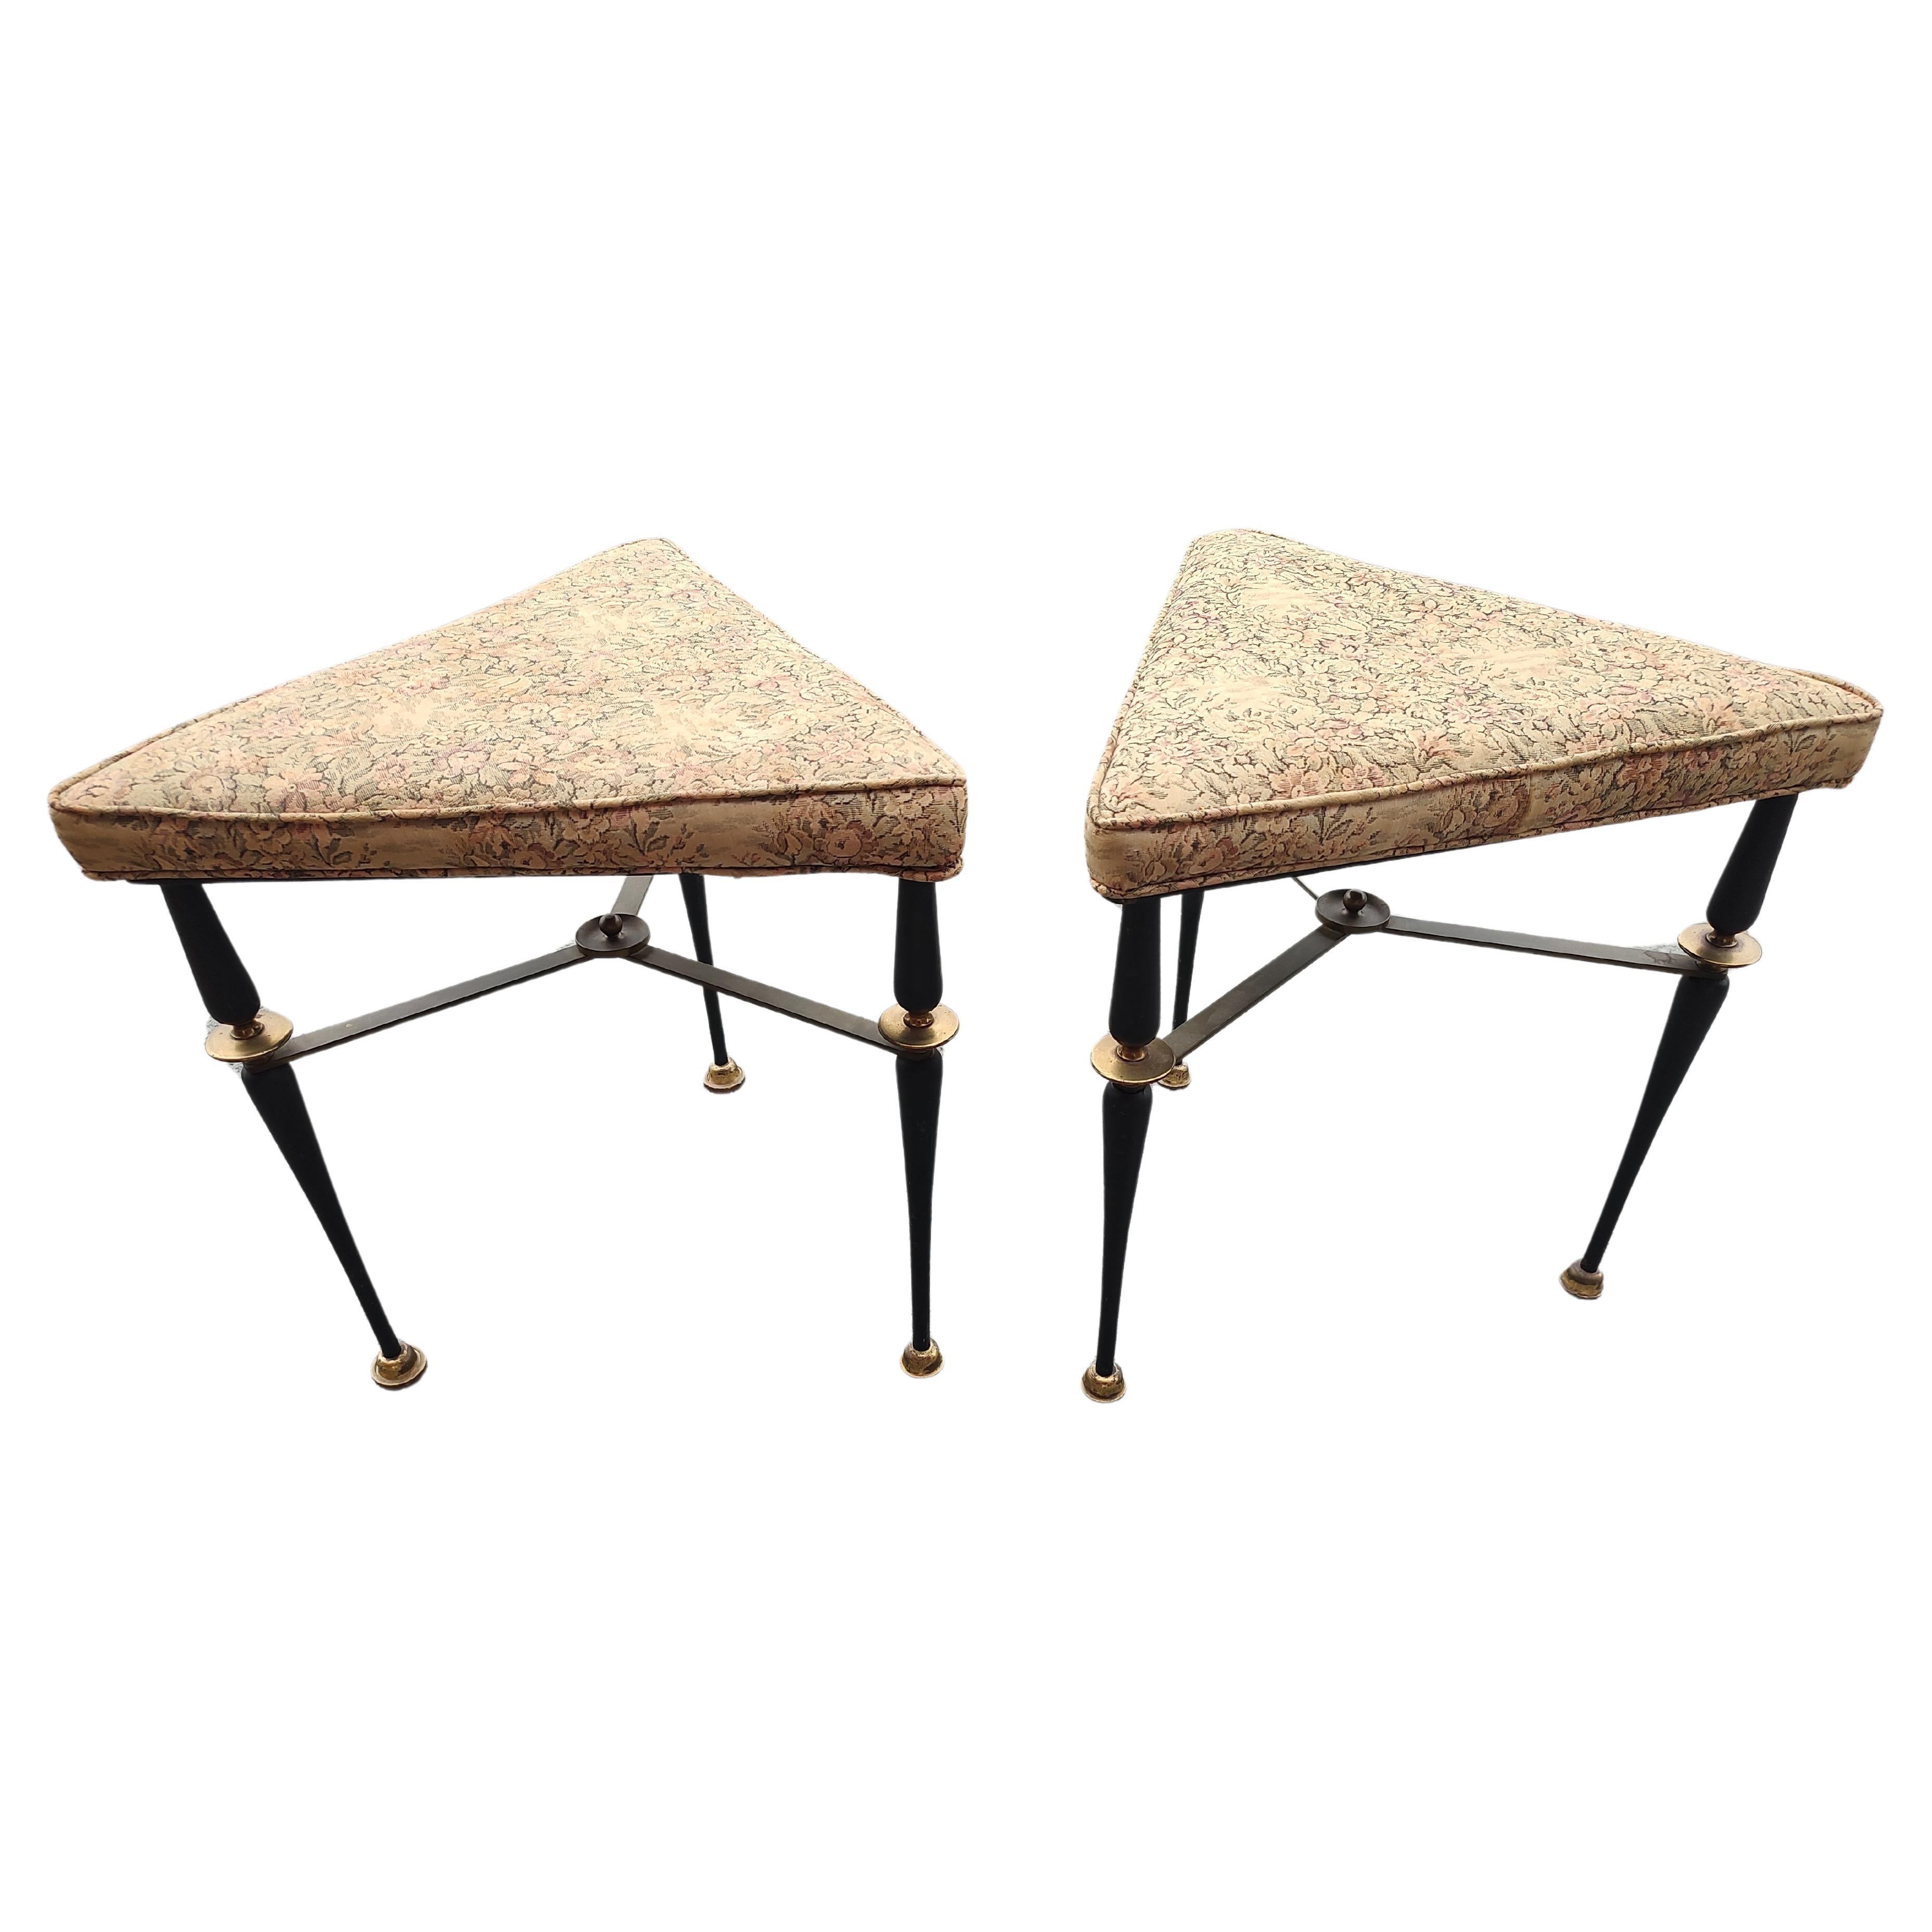 Fabulous high quality and unique pair of Triangular Benches in iron,  brass and upholstery. Heavy duty with brass stretchers and feet. Original upholstery is serviceable but in need of an update. Priced and sold as a pair.